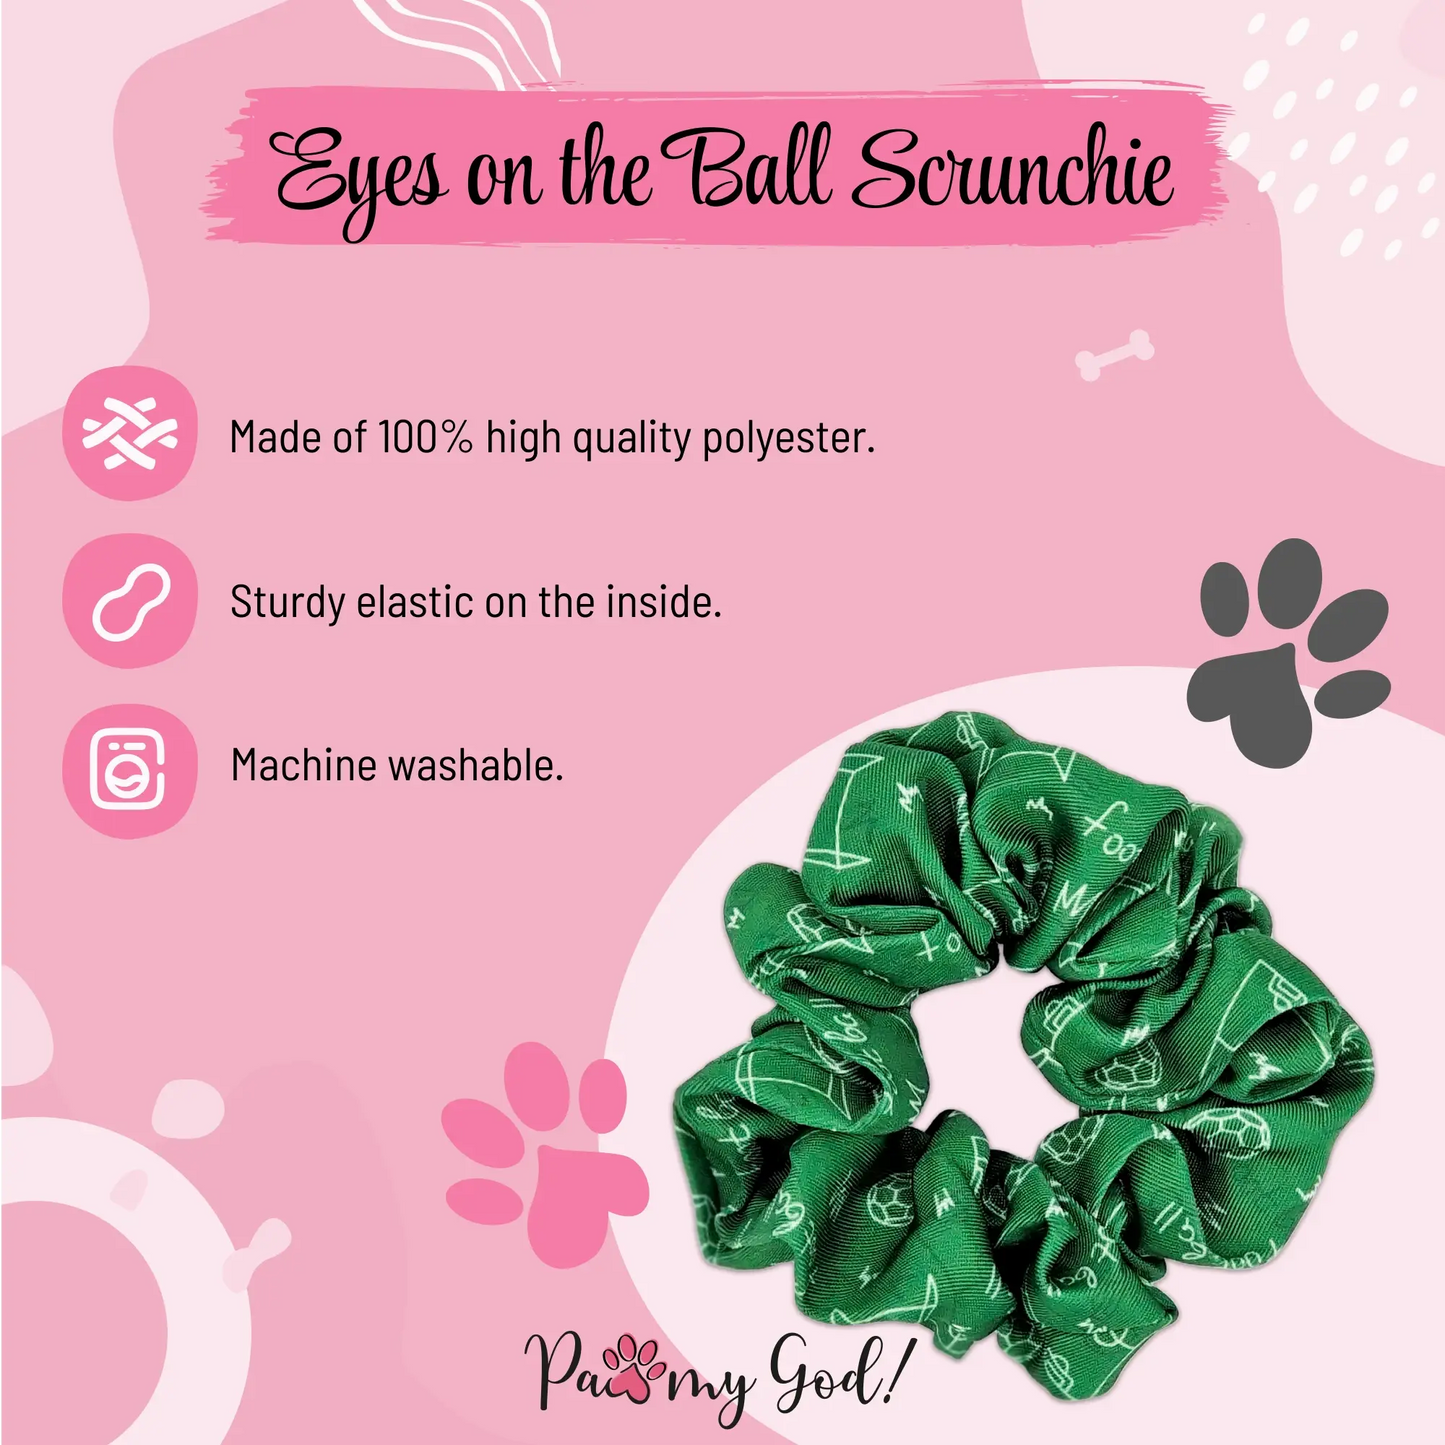 Eyes on the Ball Scrunchie Features